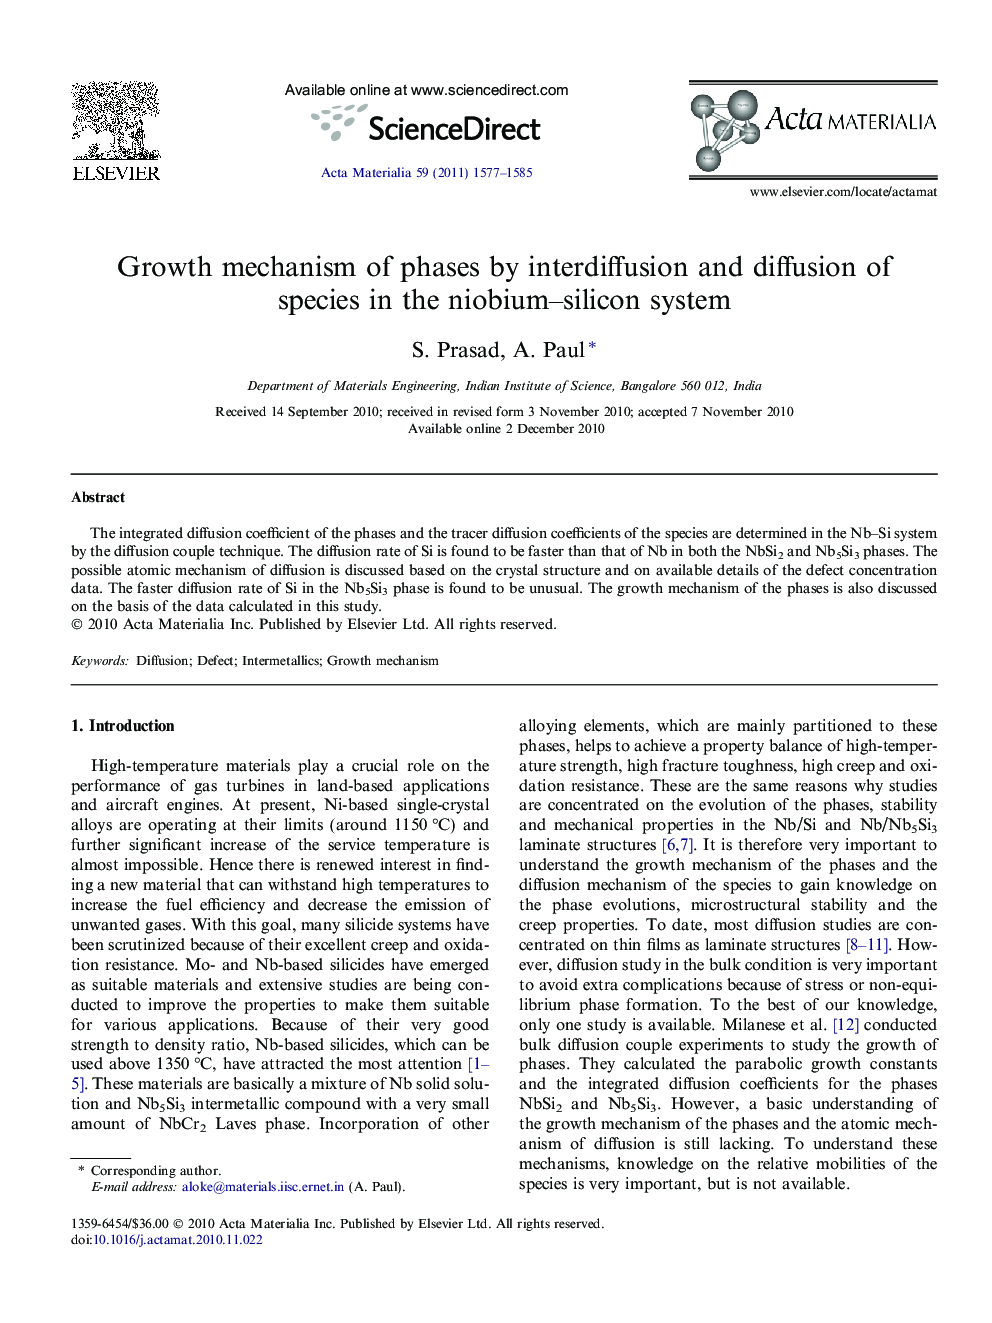 Growth mechanism of phases by interdiffusion and diffusion of species in the niobium-silicon system